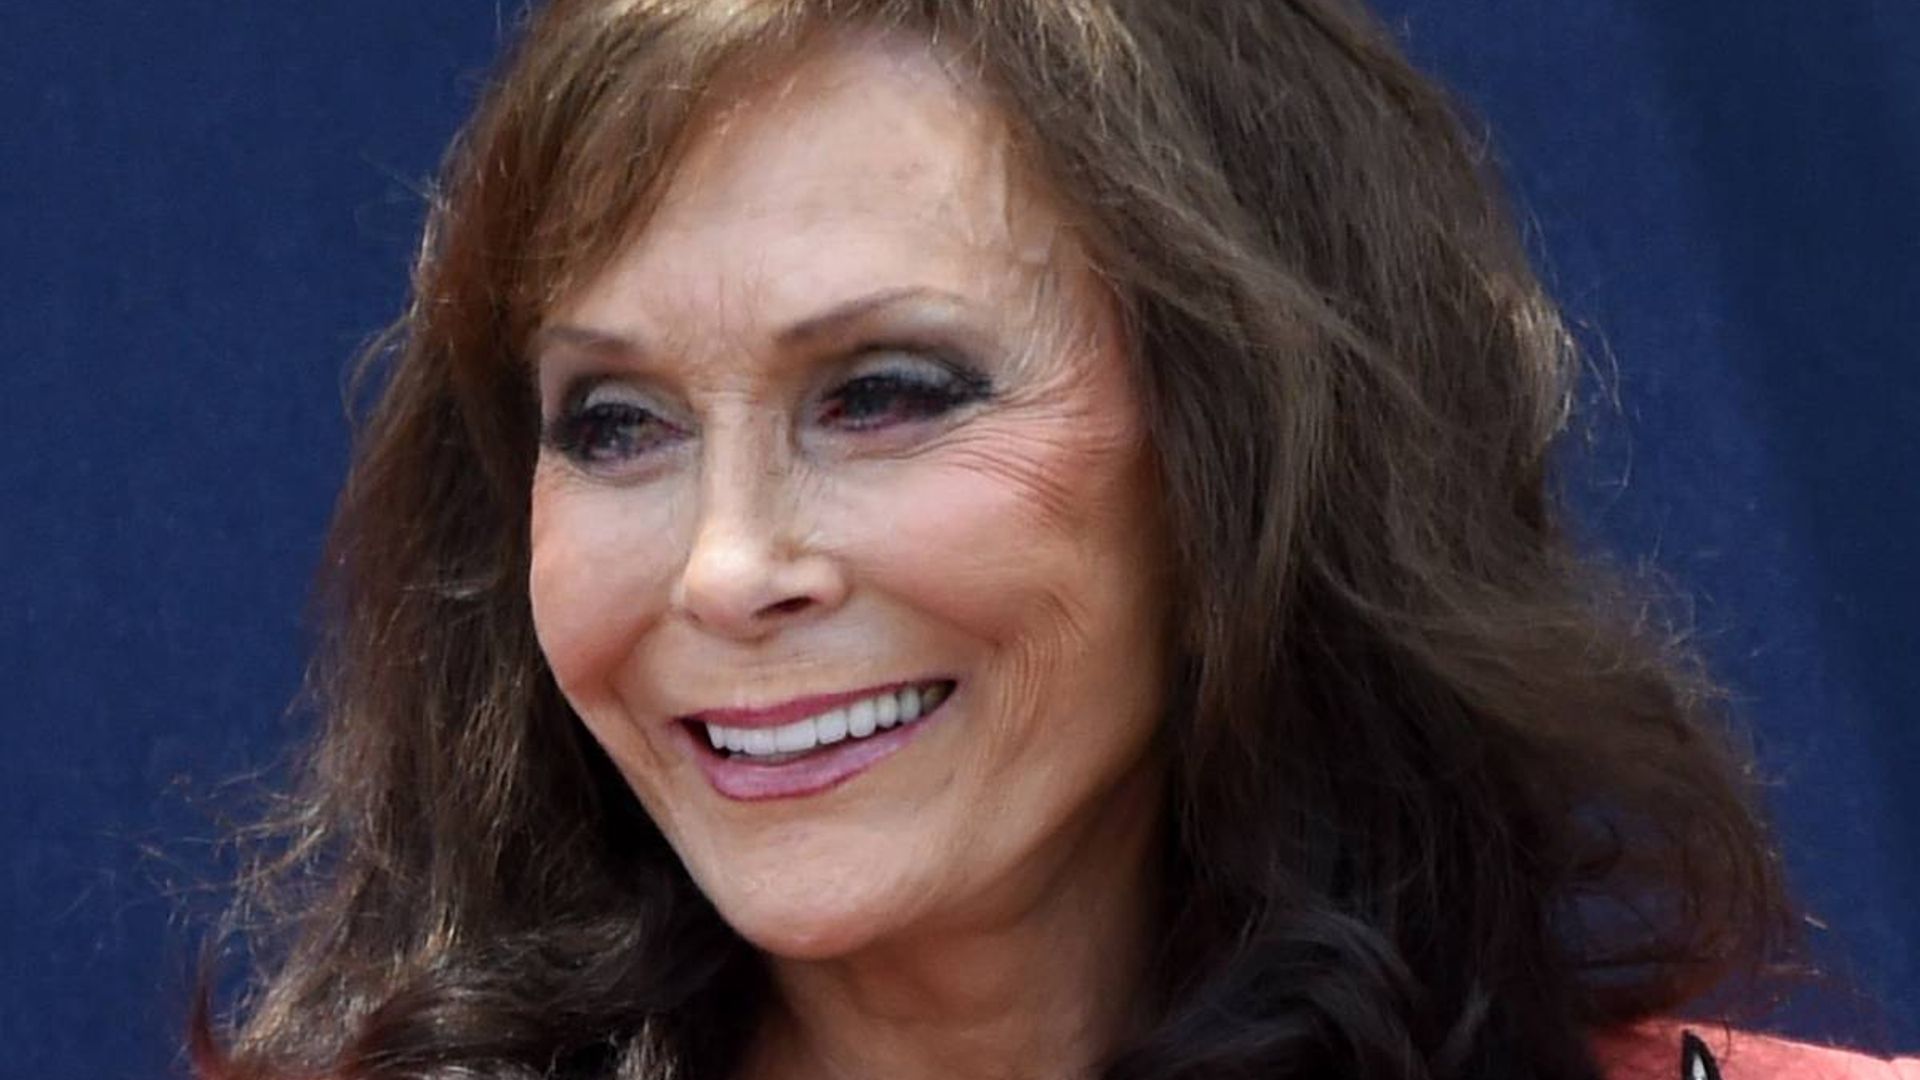 Country star Loretta Lynn celebrates 'proud' moment with uplifting personal message